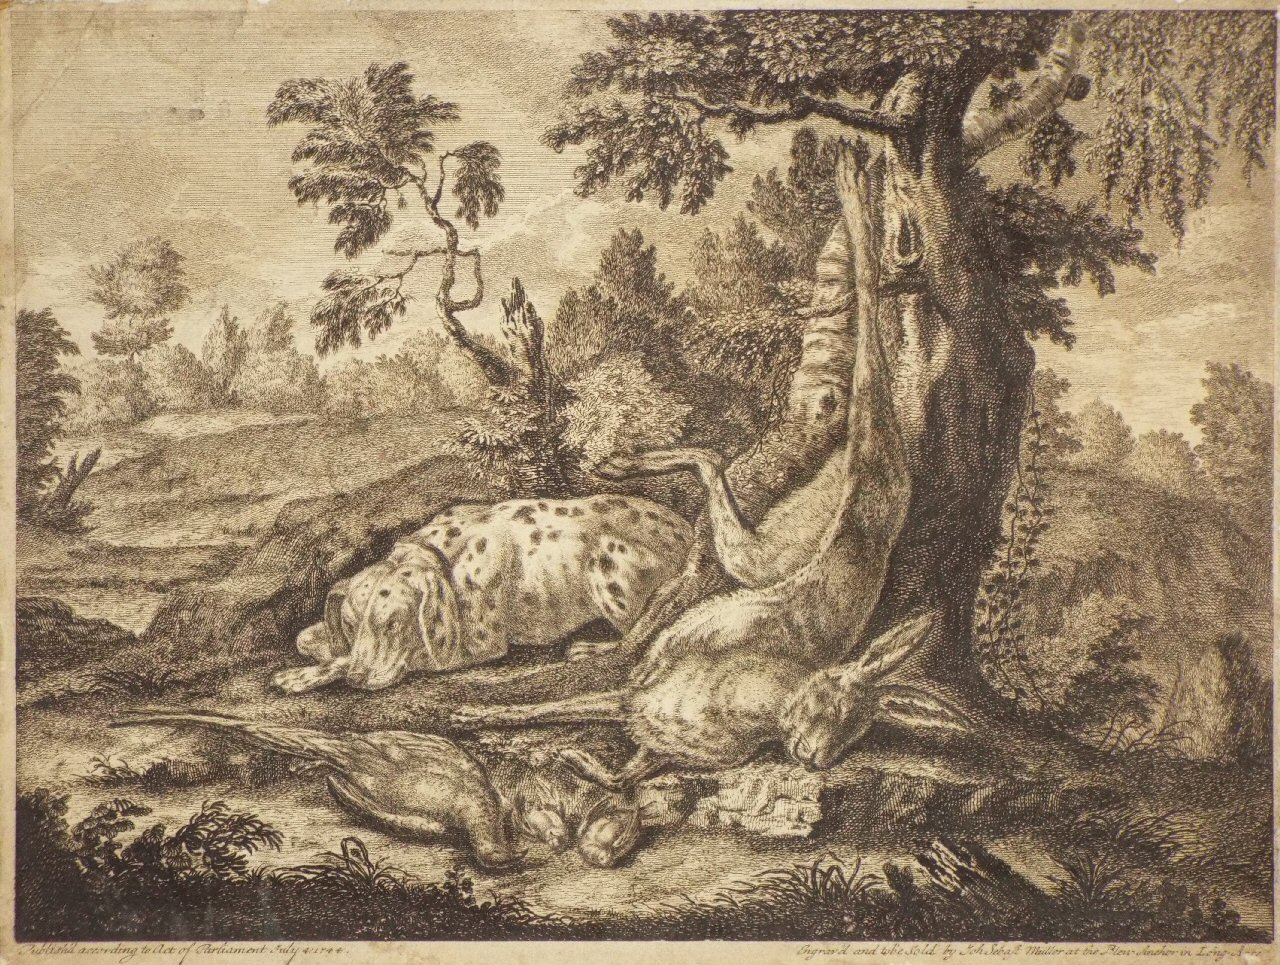 Print - (Dog with dead game) - Muller